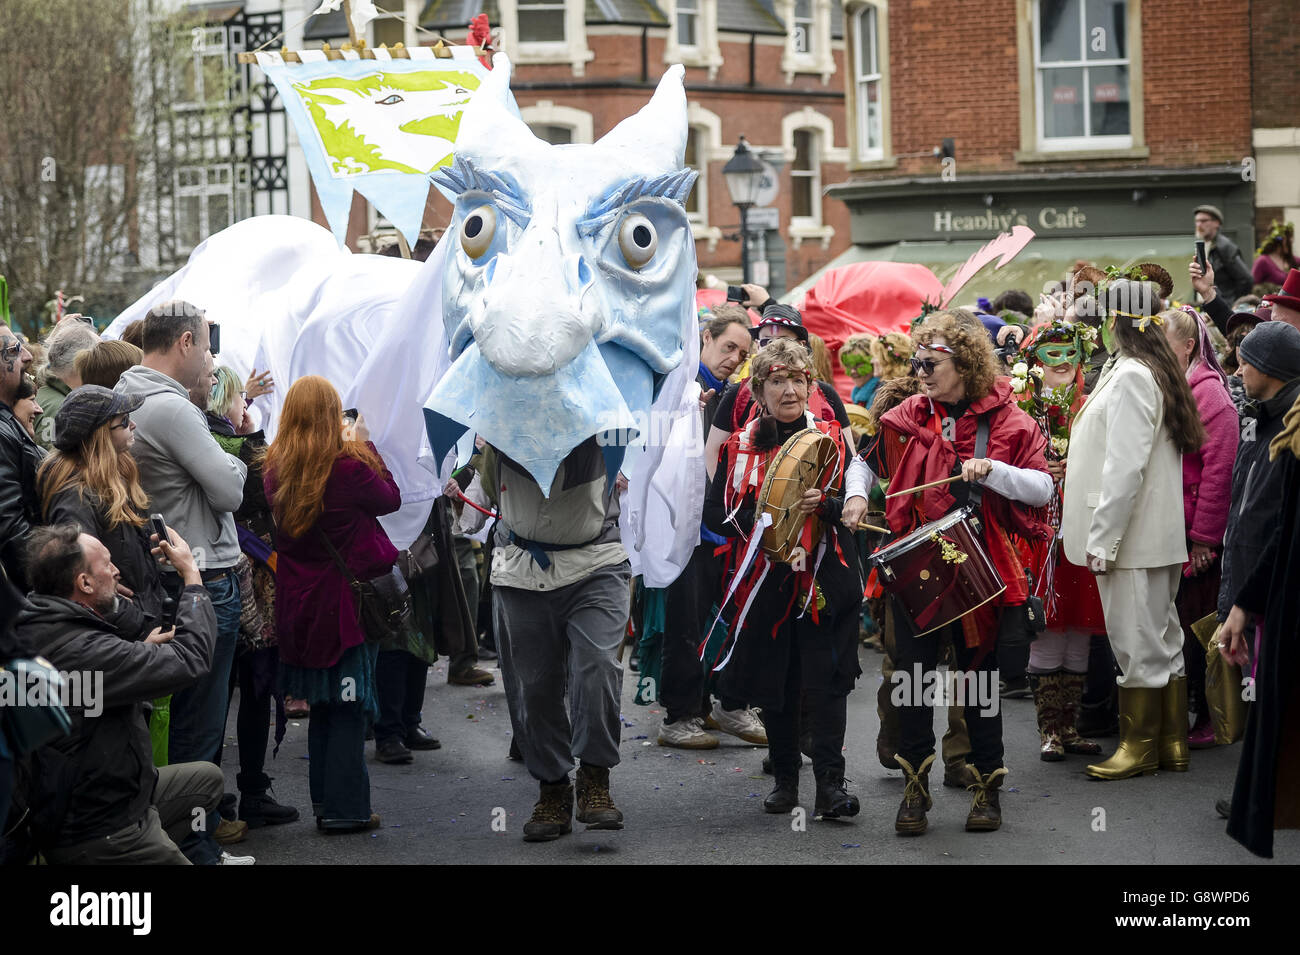 A white dragon costume proceeds through the crowds during the Glastonbury Beltane celebrations in Somerset, where the traditionally Gaelic May Day festival is celebrated annually on the 1st of May or halfway between the spring equinox and the summer solstice. Stock Photo